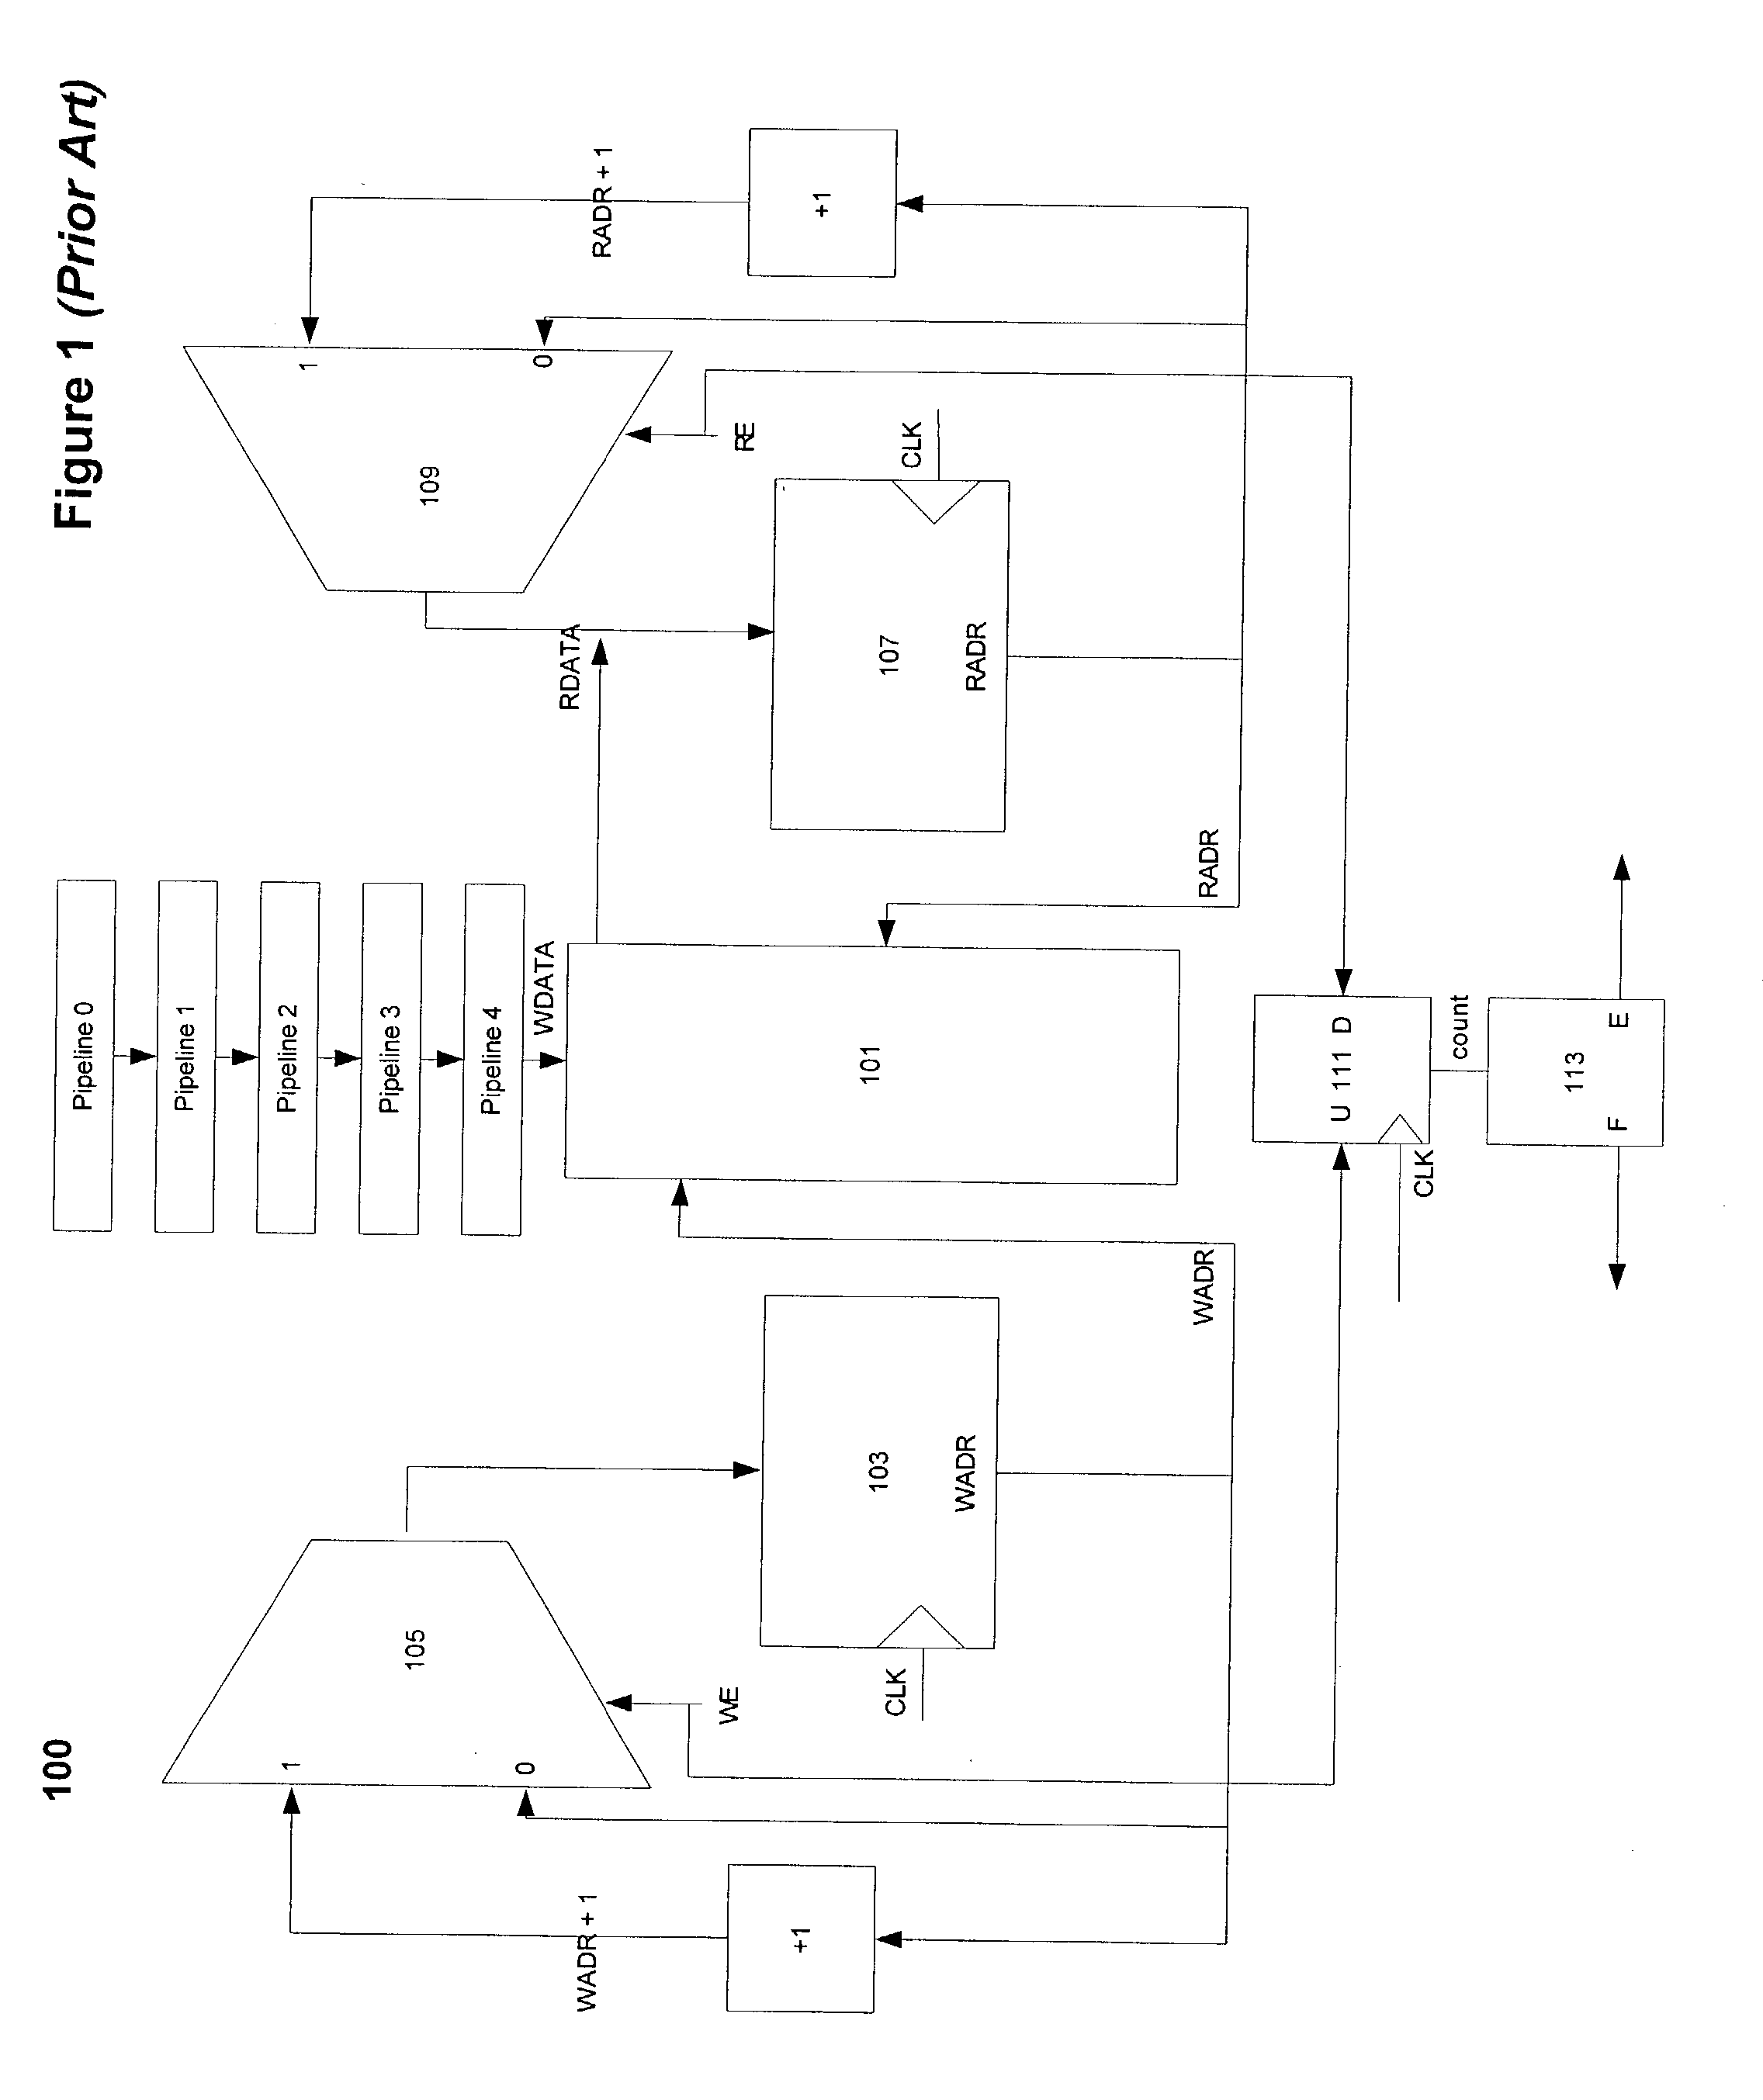 Method and system for optimized FIFO full condition control